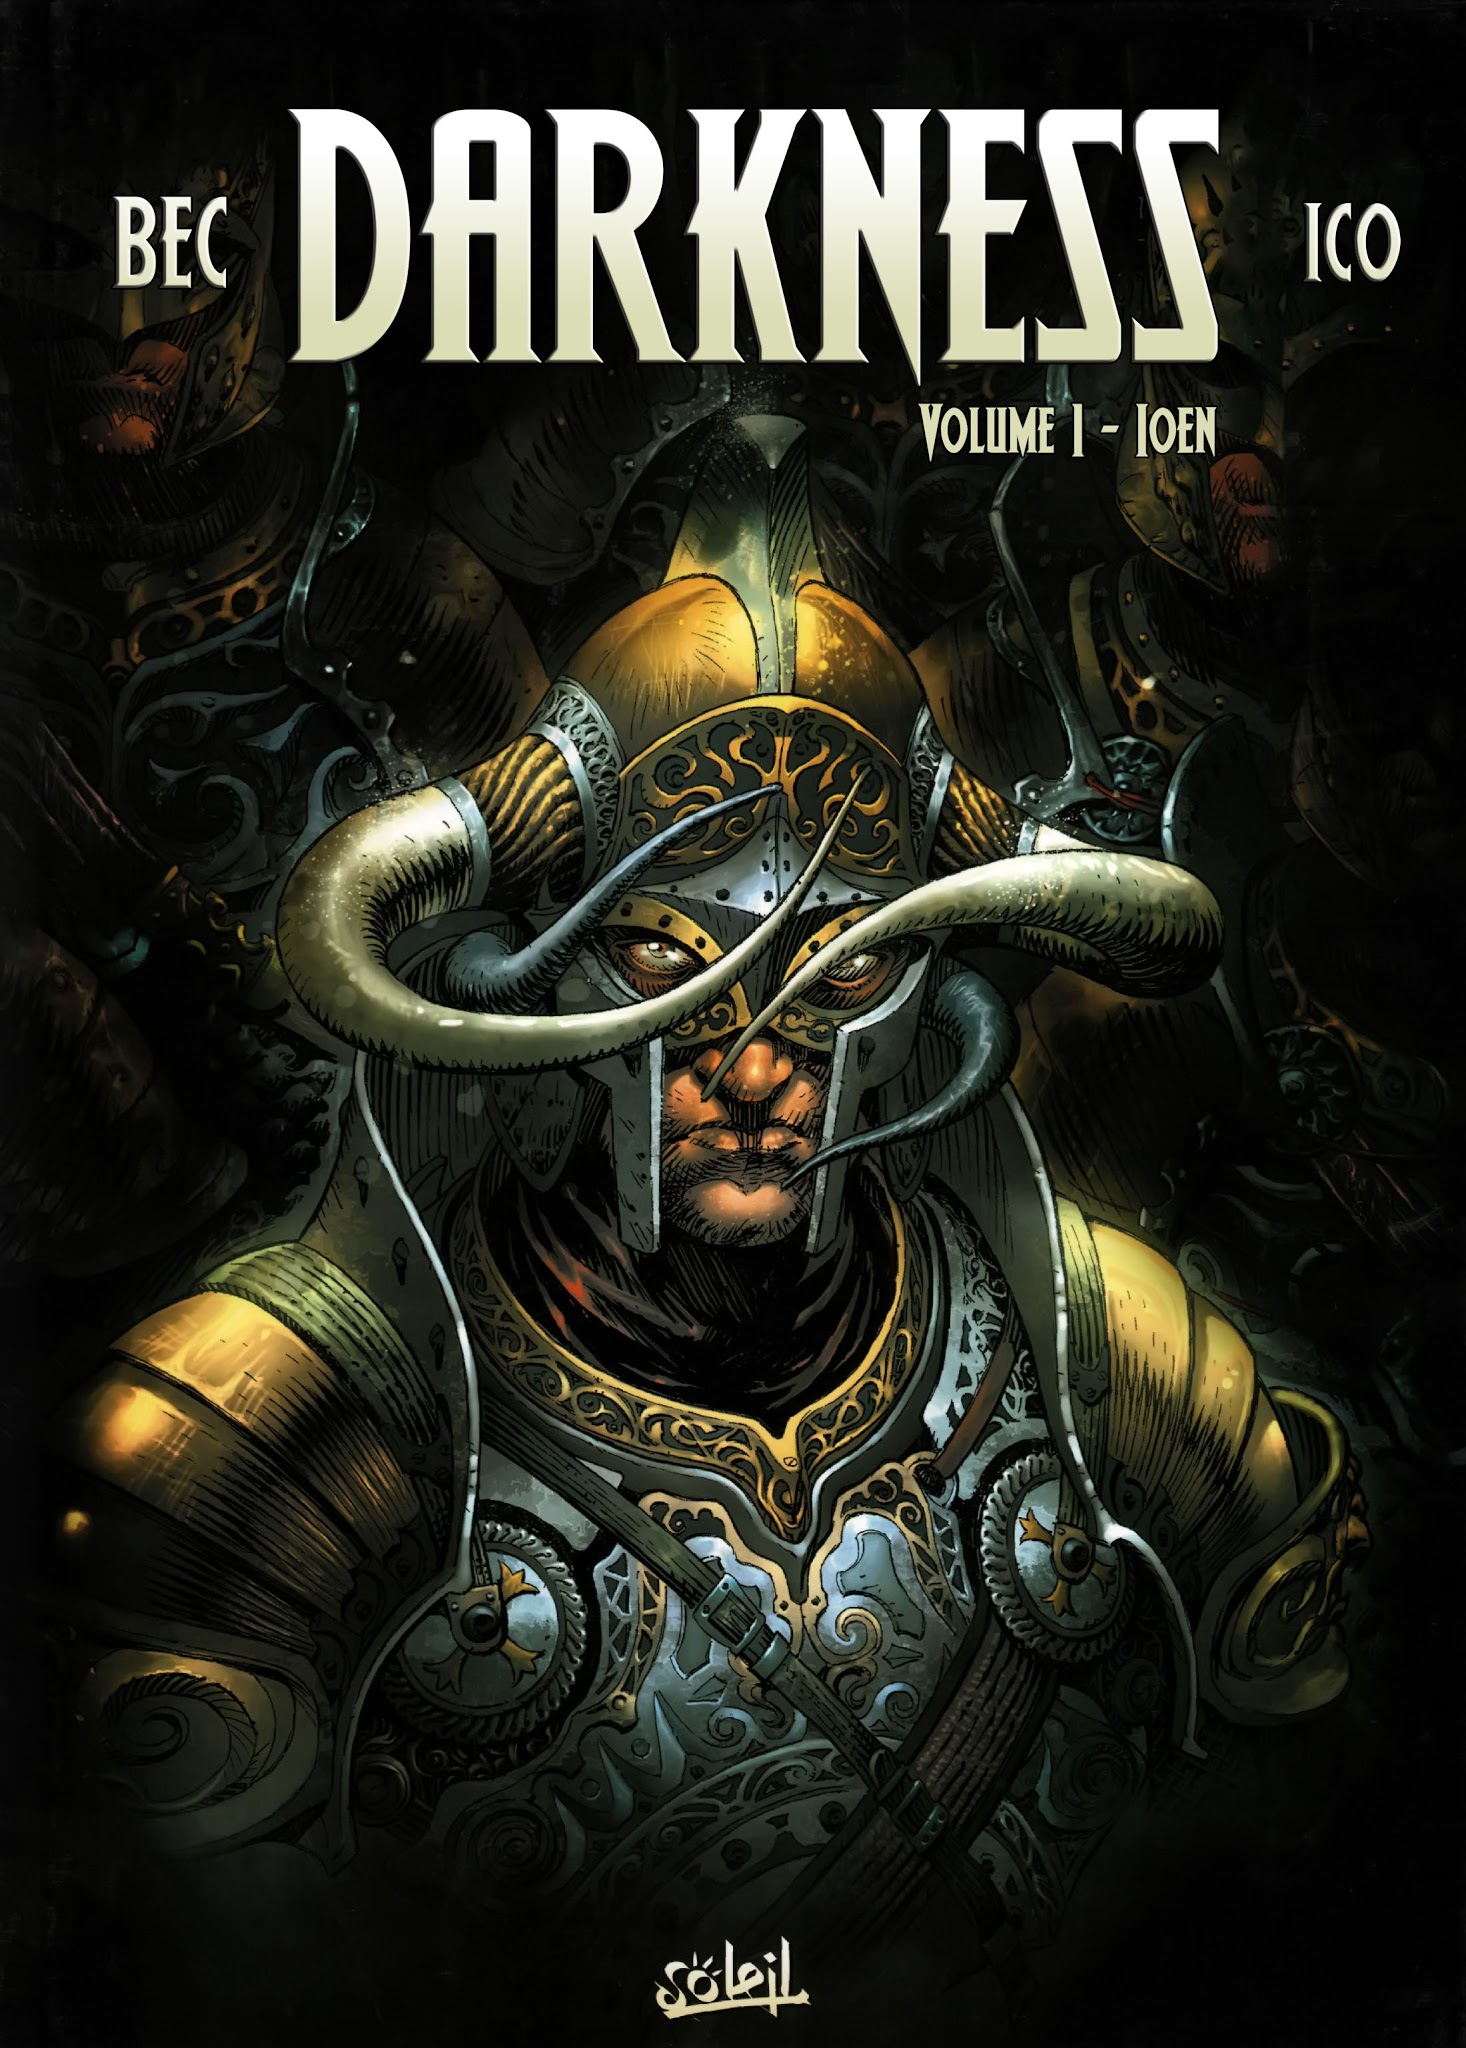 Read online Darkness comic -  Issue #1 - 1